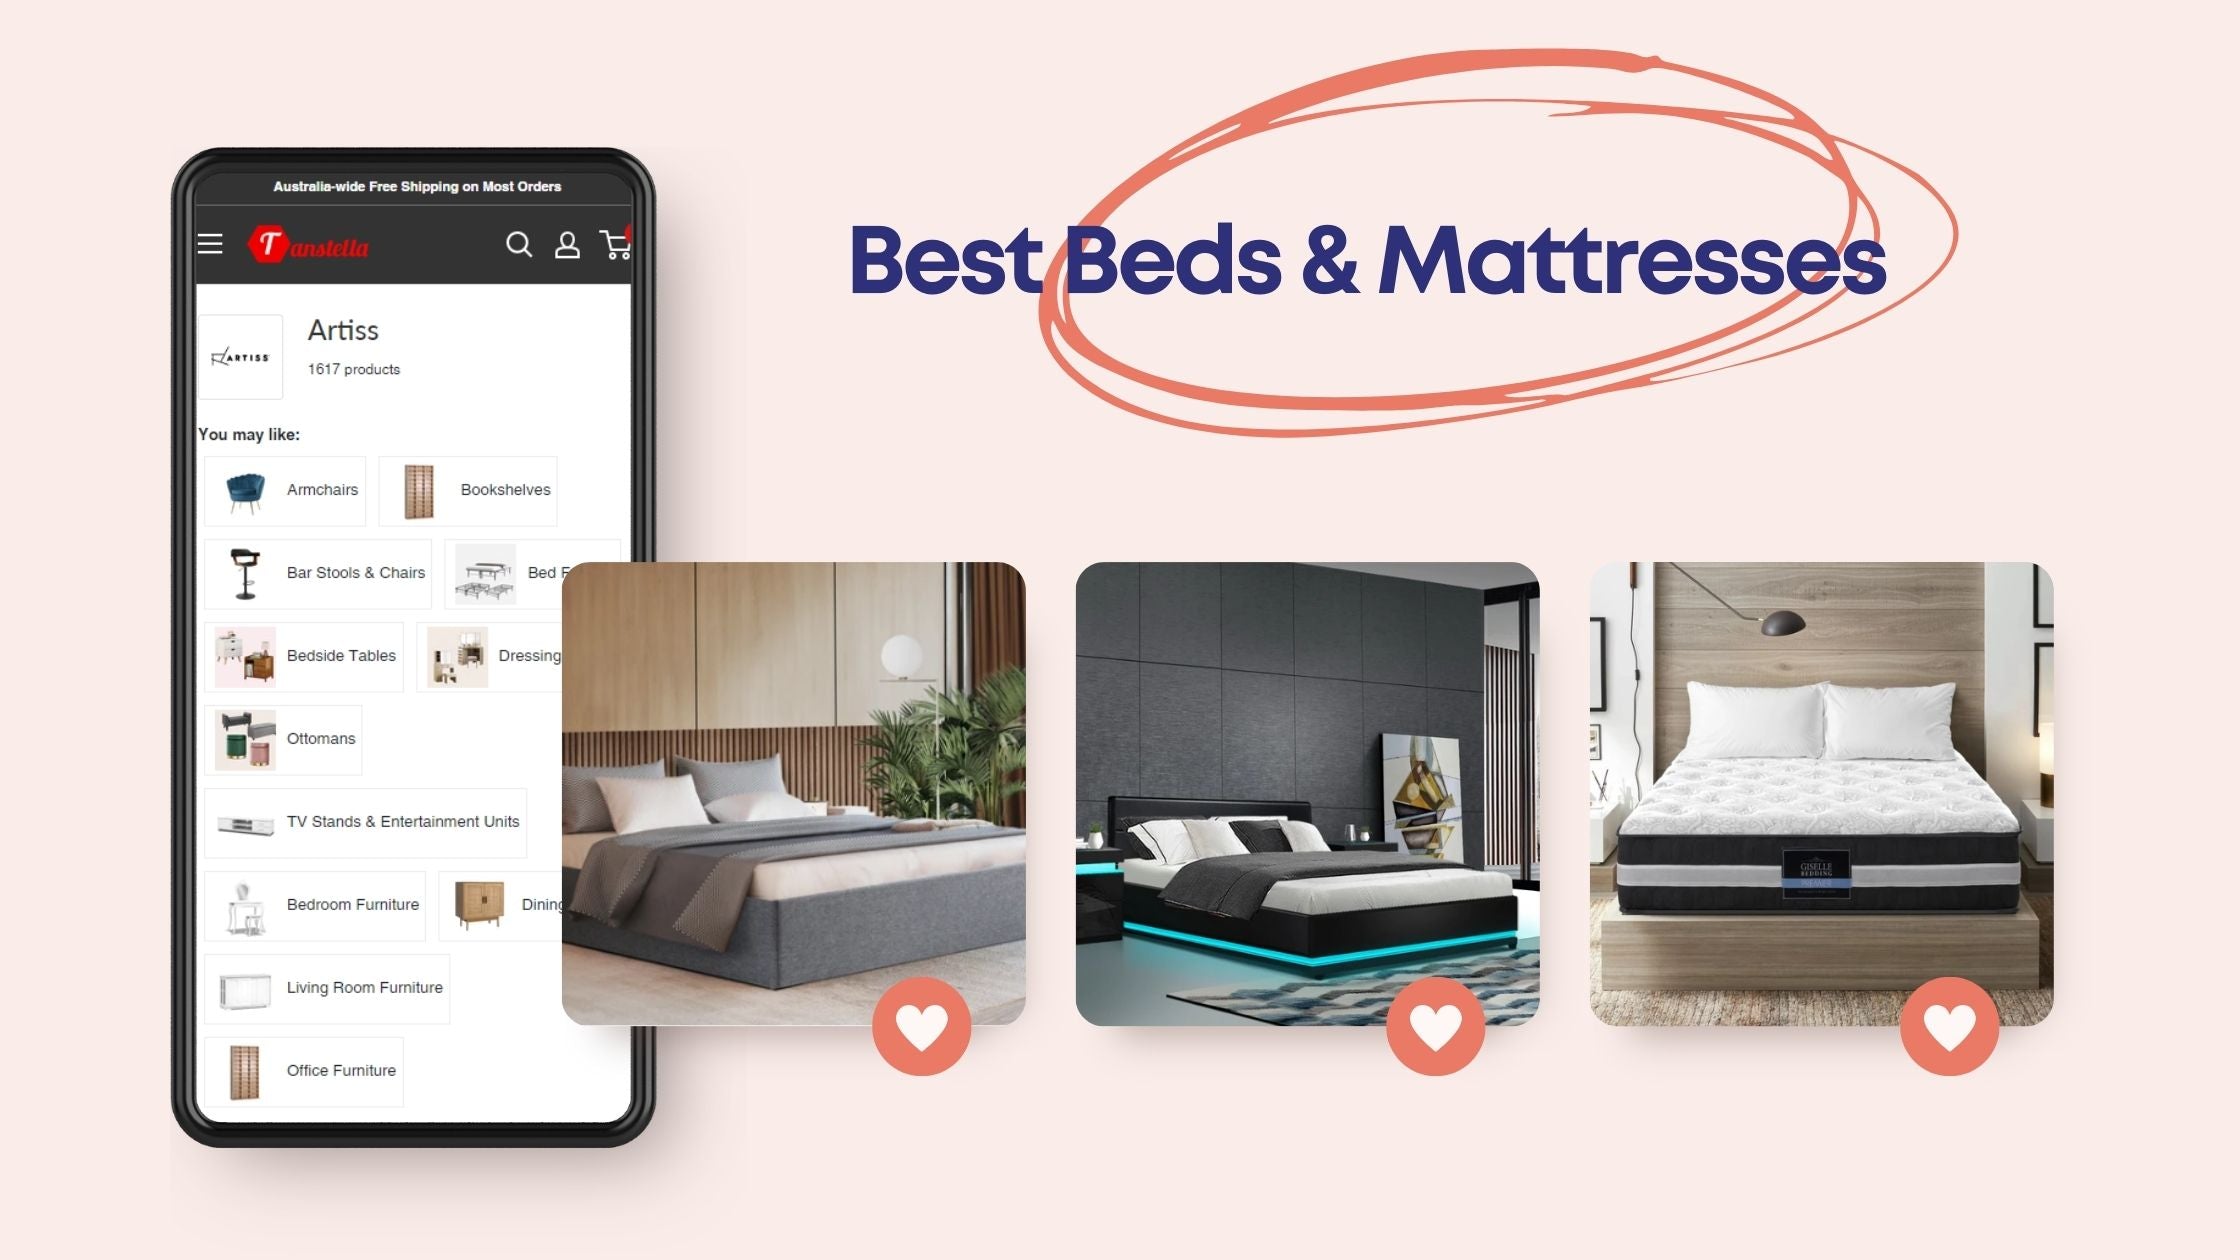 Our Best Beds & Mattresses Brand: Artiss and Giselle Bedding